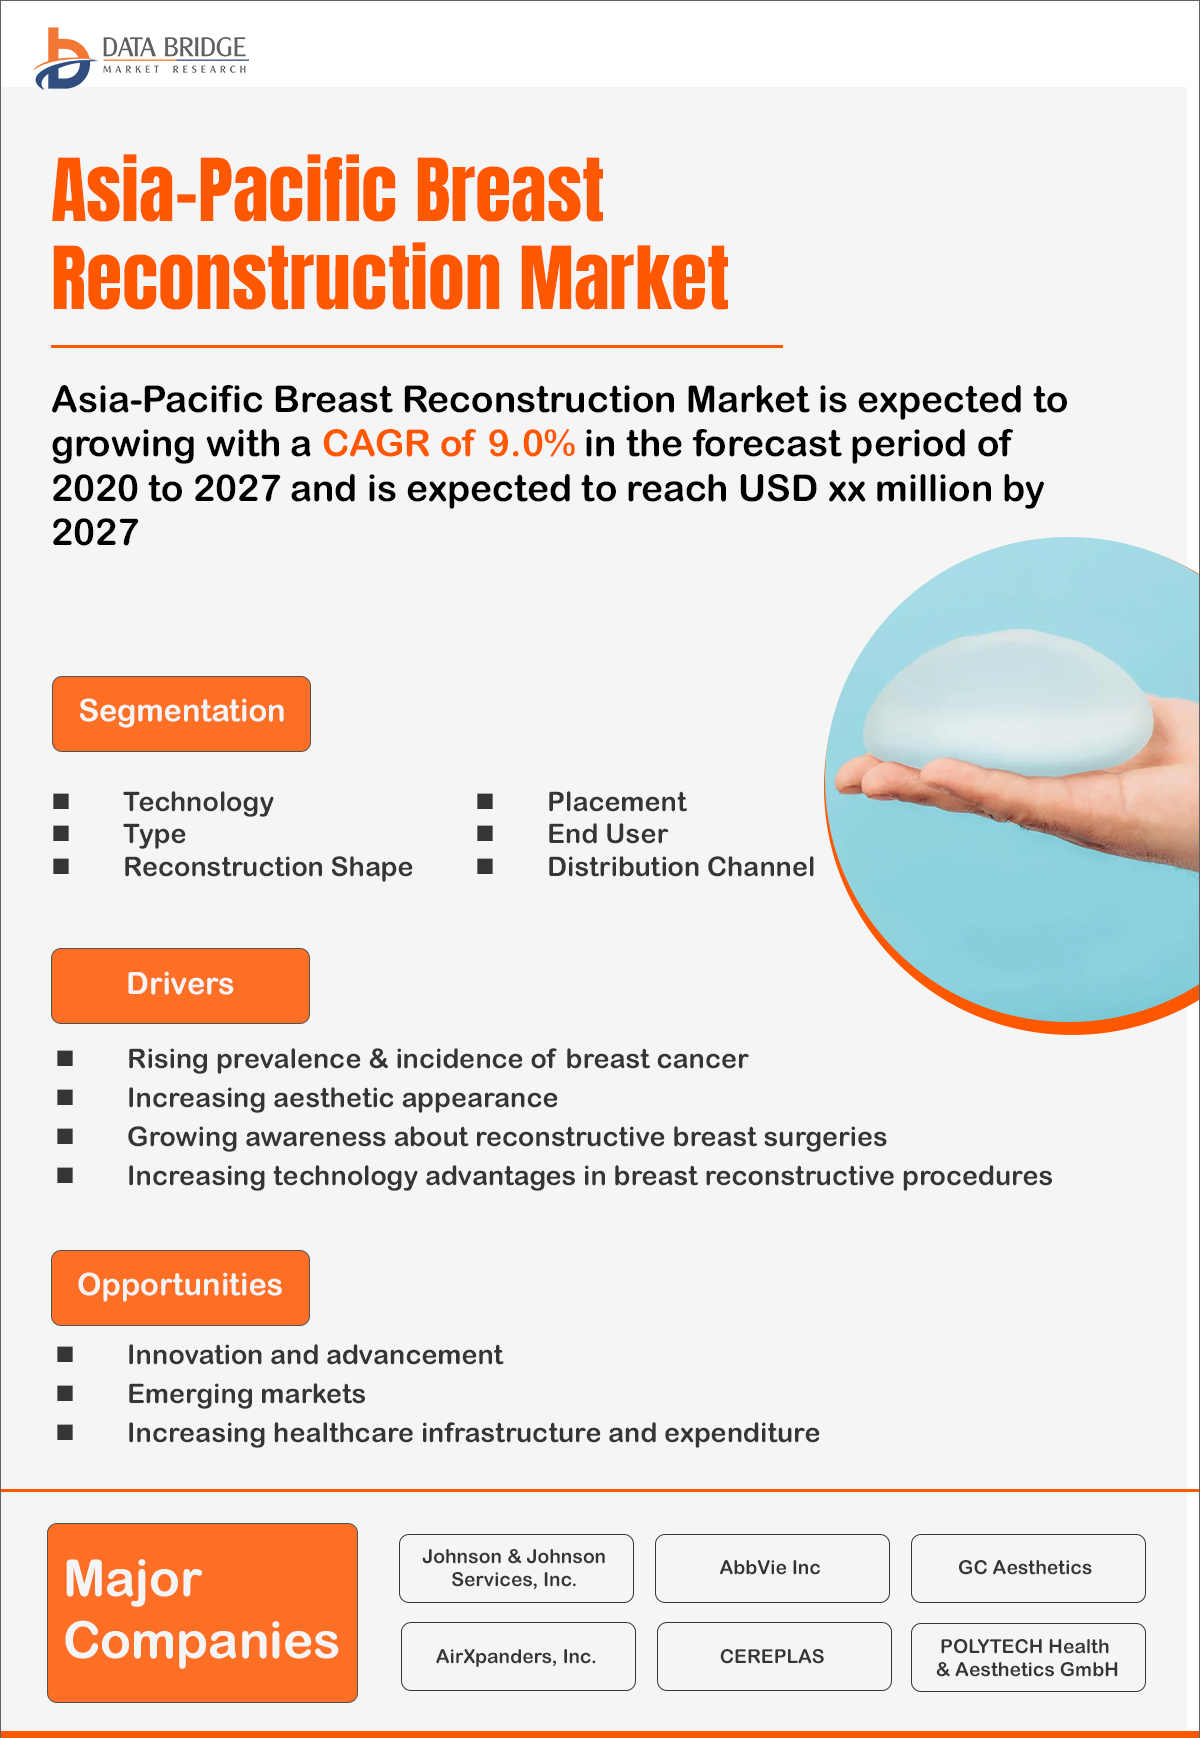 Asia-Pacific Breast Reconstruction Market